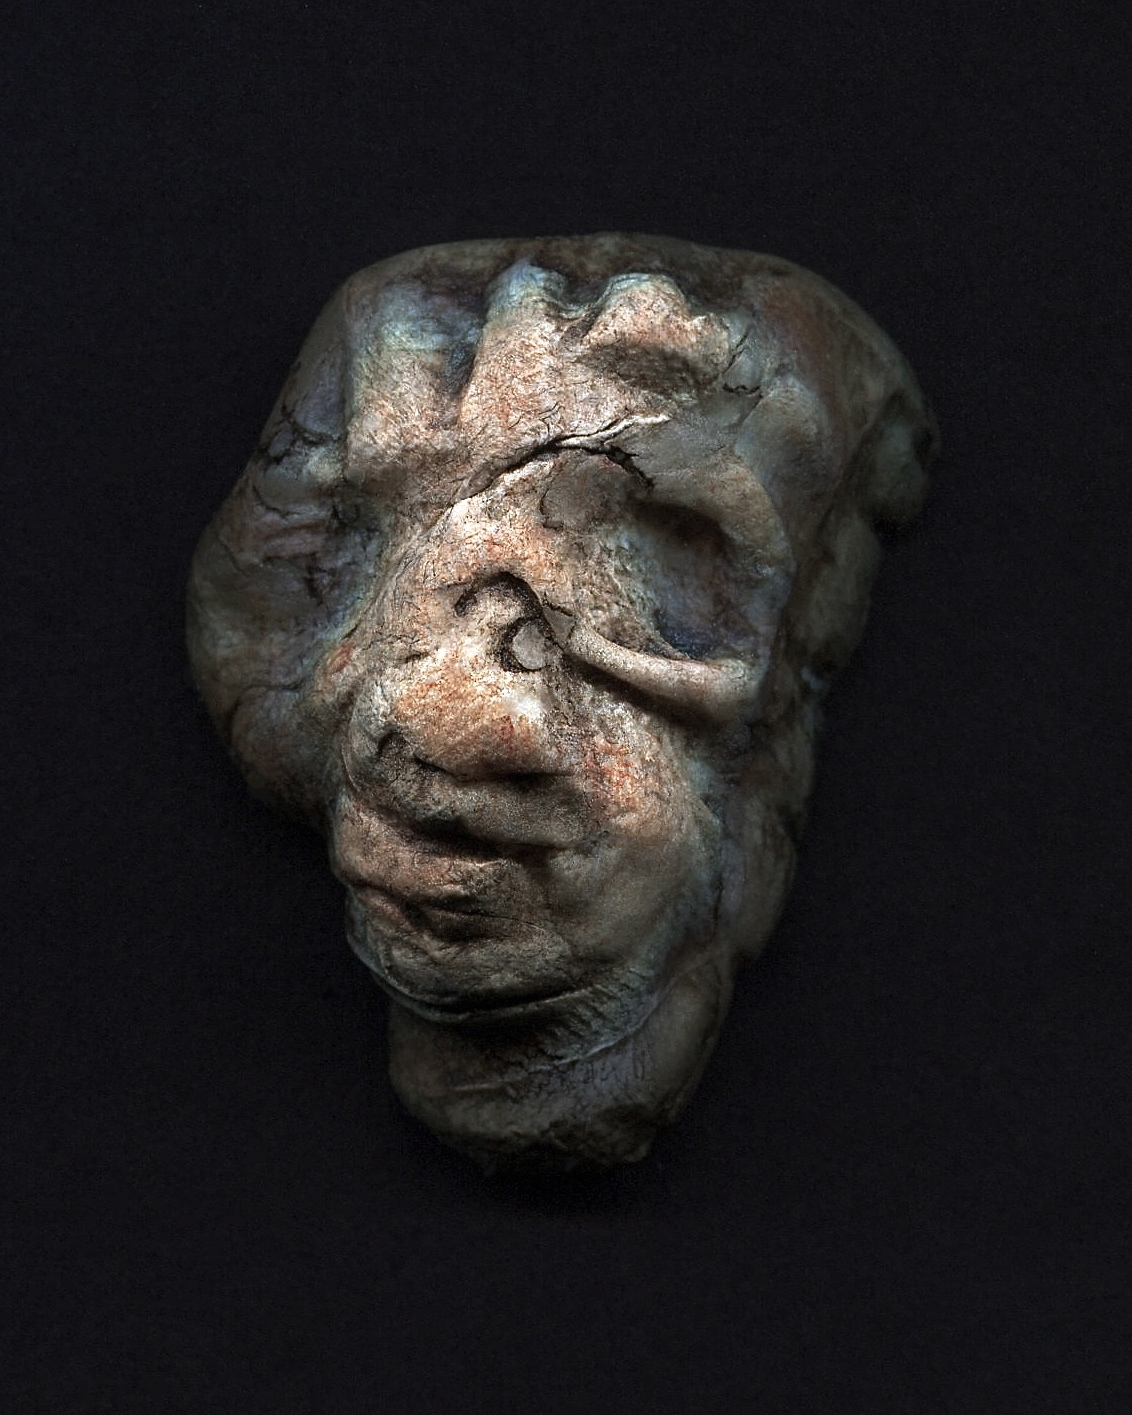 a very creepy looking stone on a black background